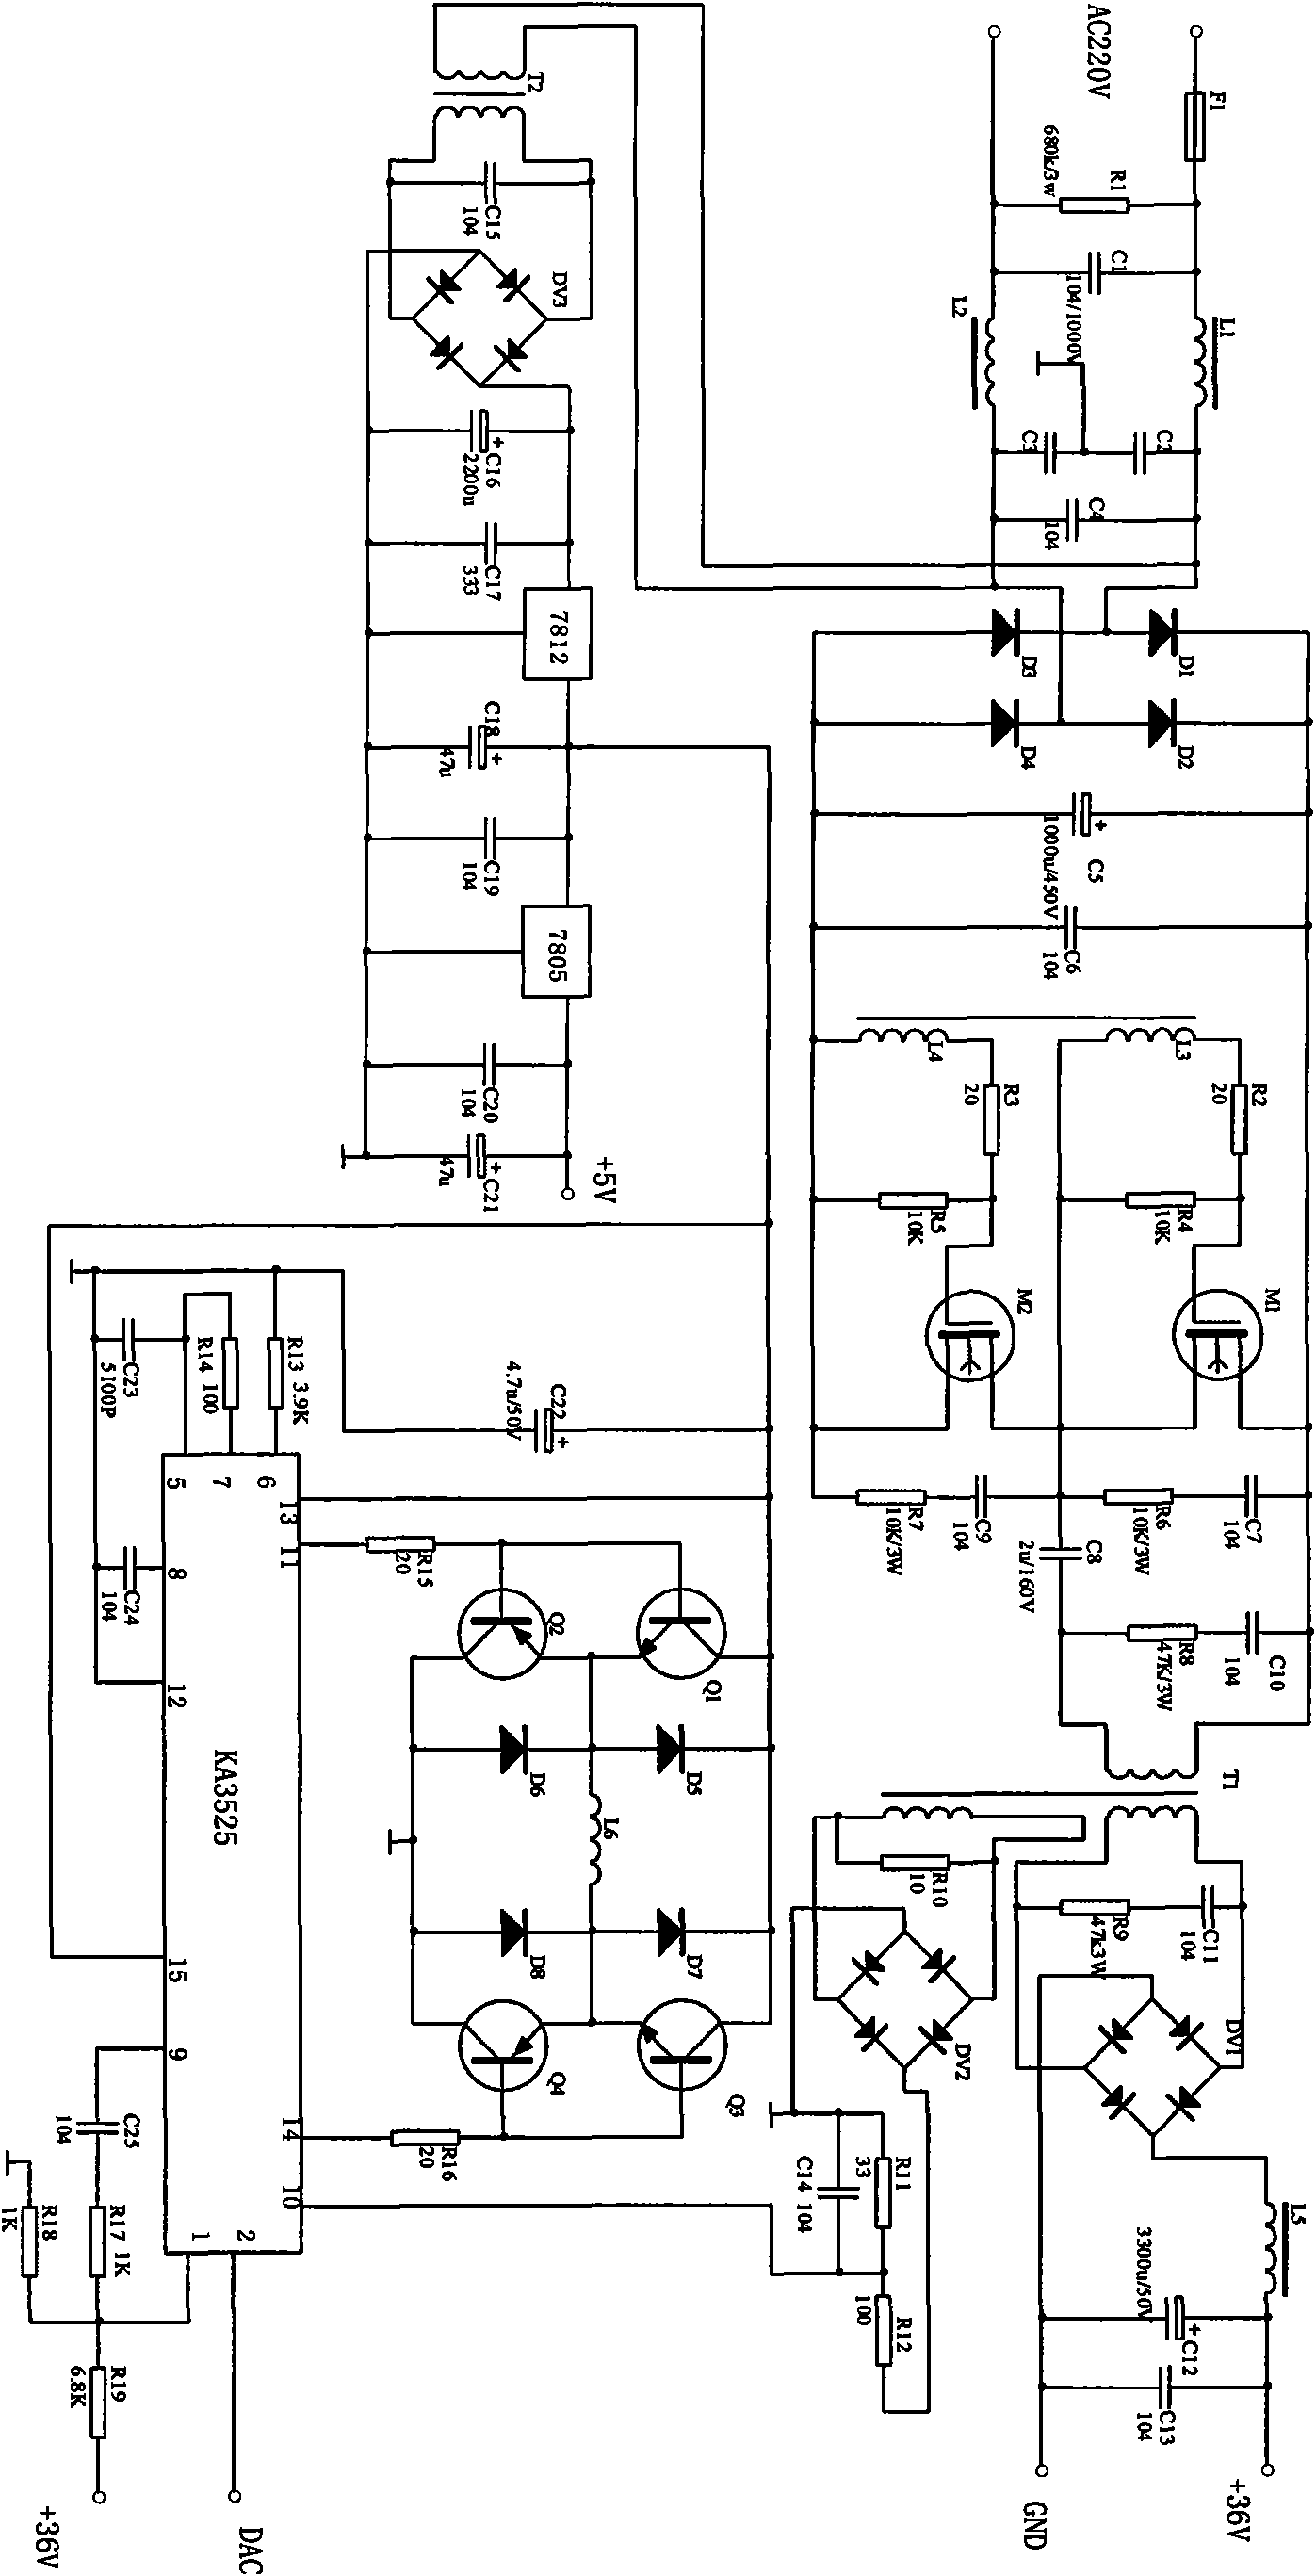 Design of singlechip-controlled switch power